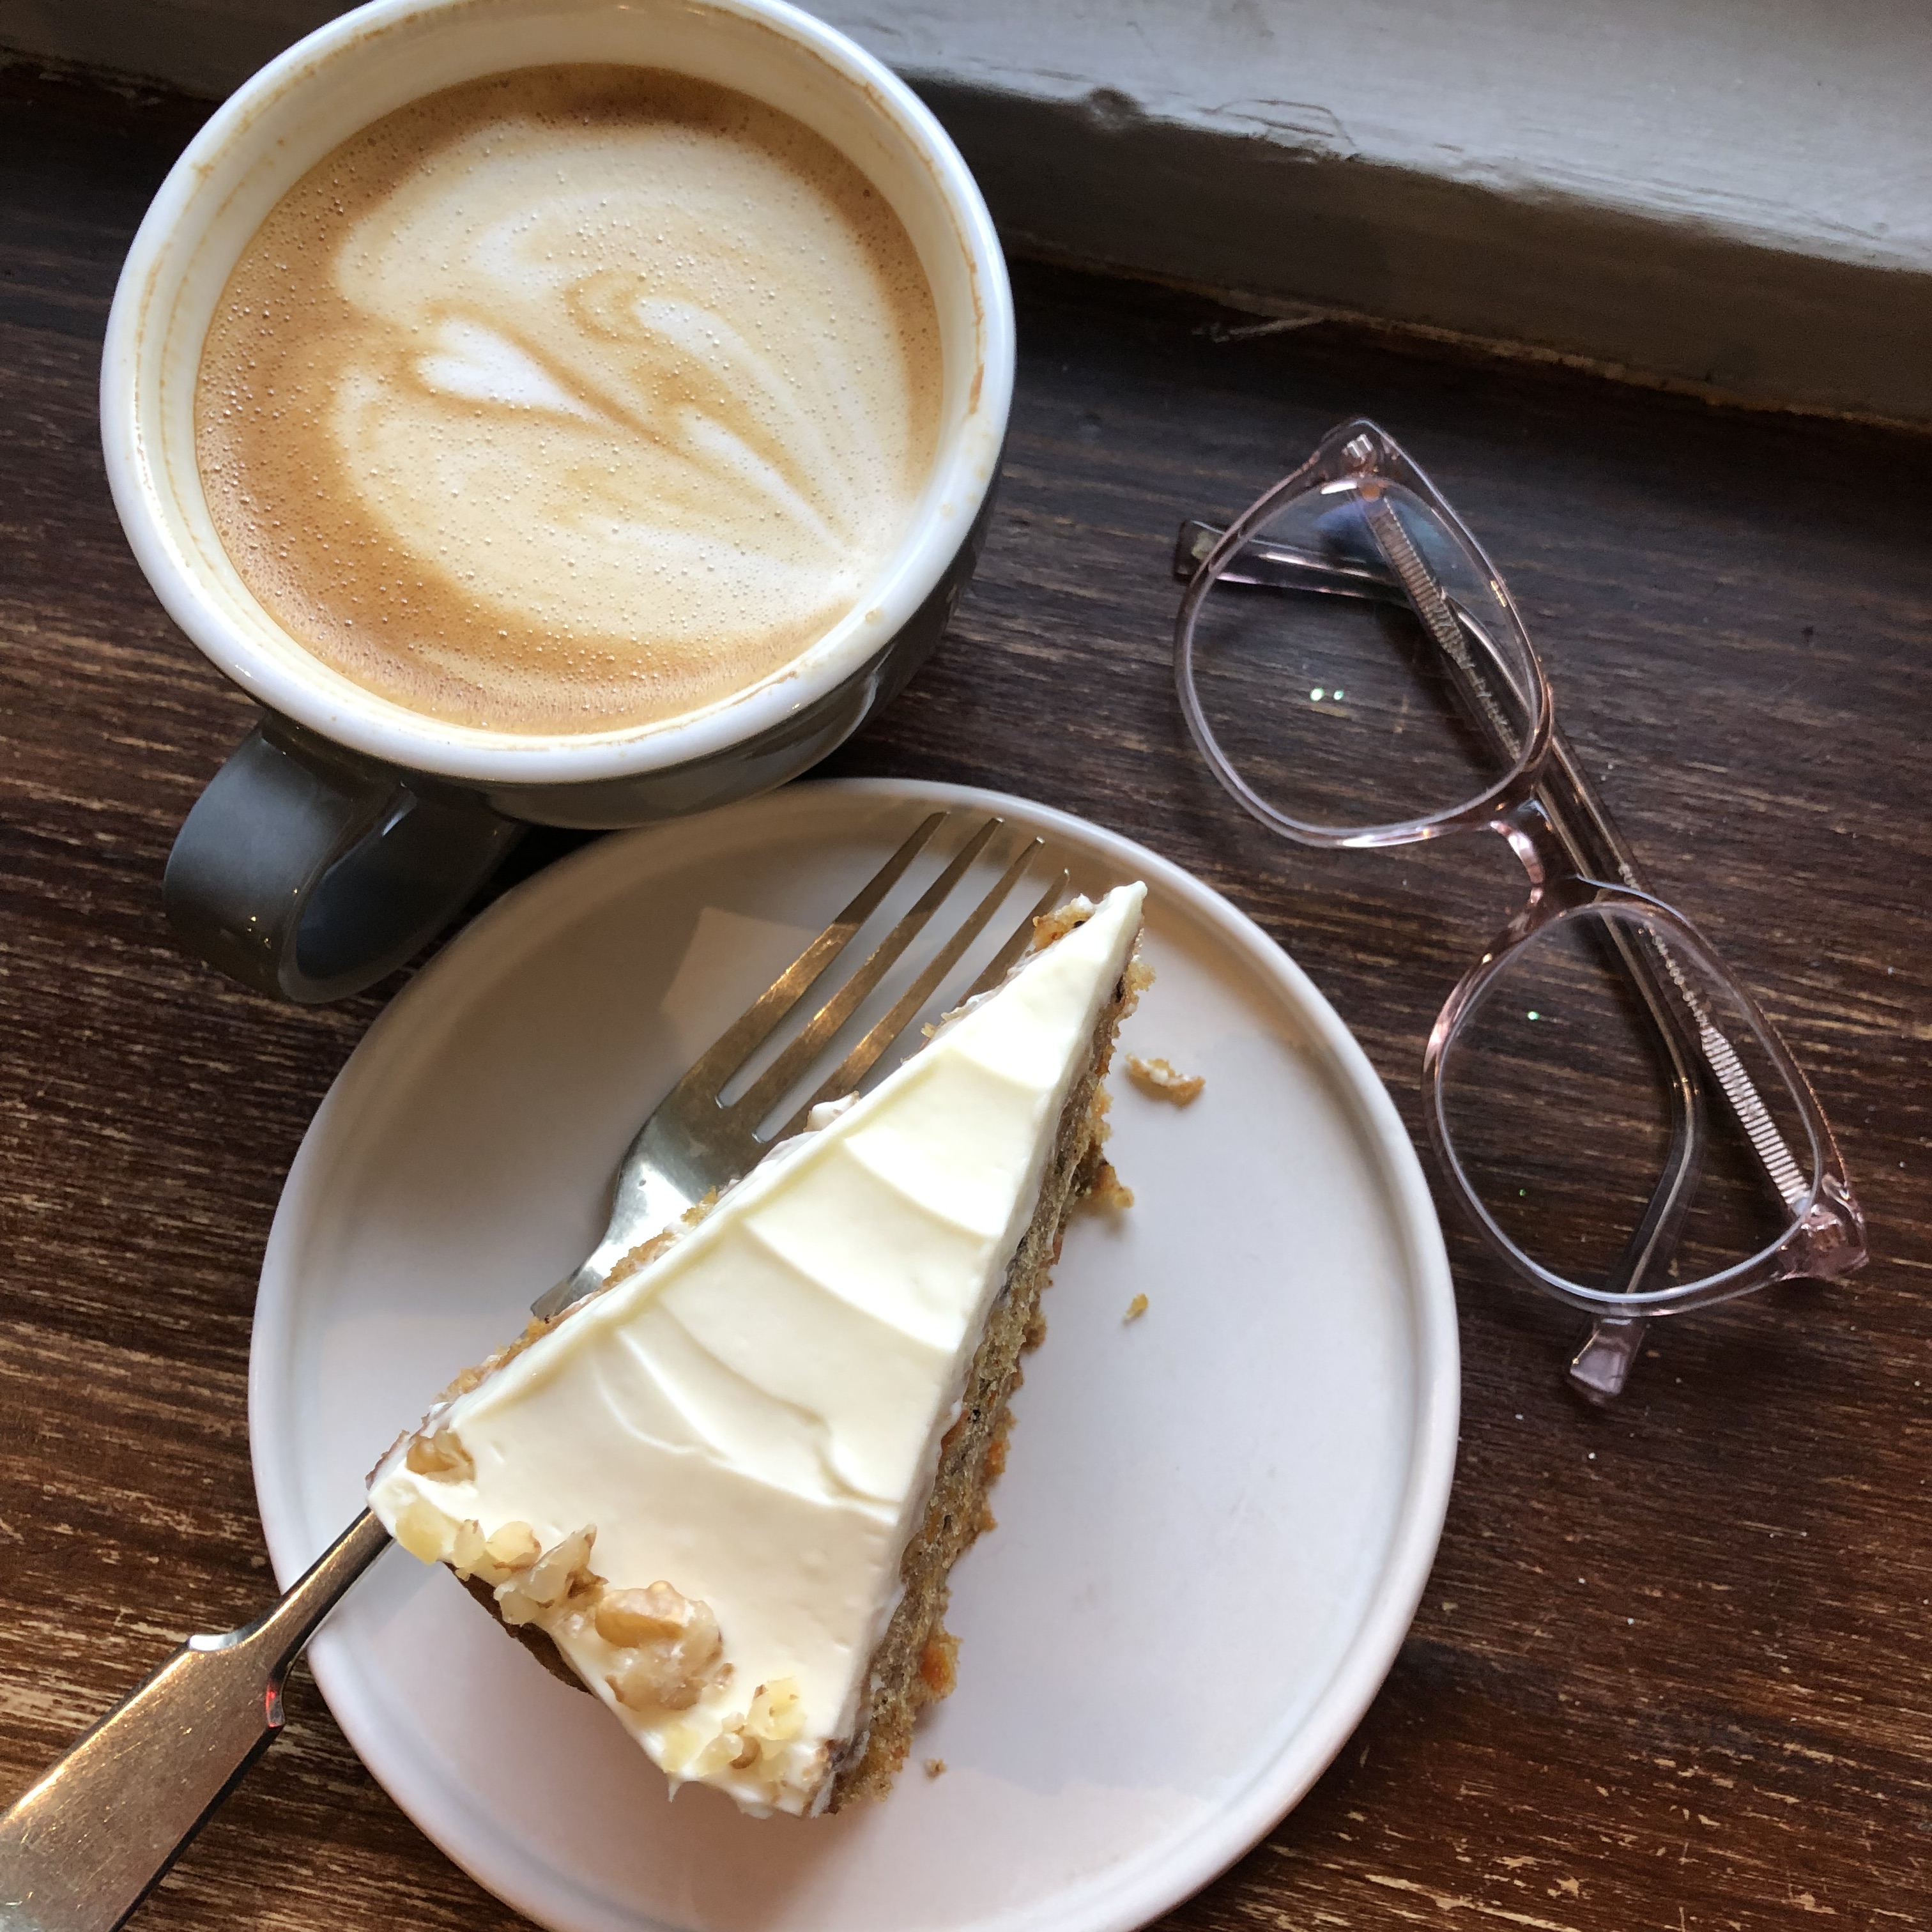 edinburgh study abroad adventures arrival initial thoughts updates lovecrumbs coffee cake